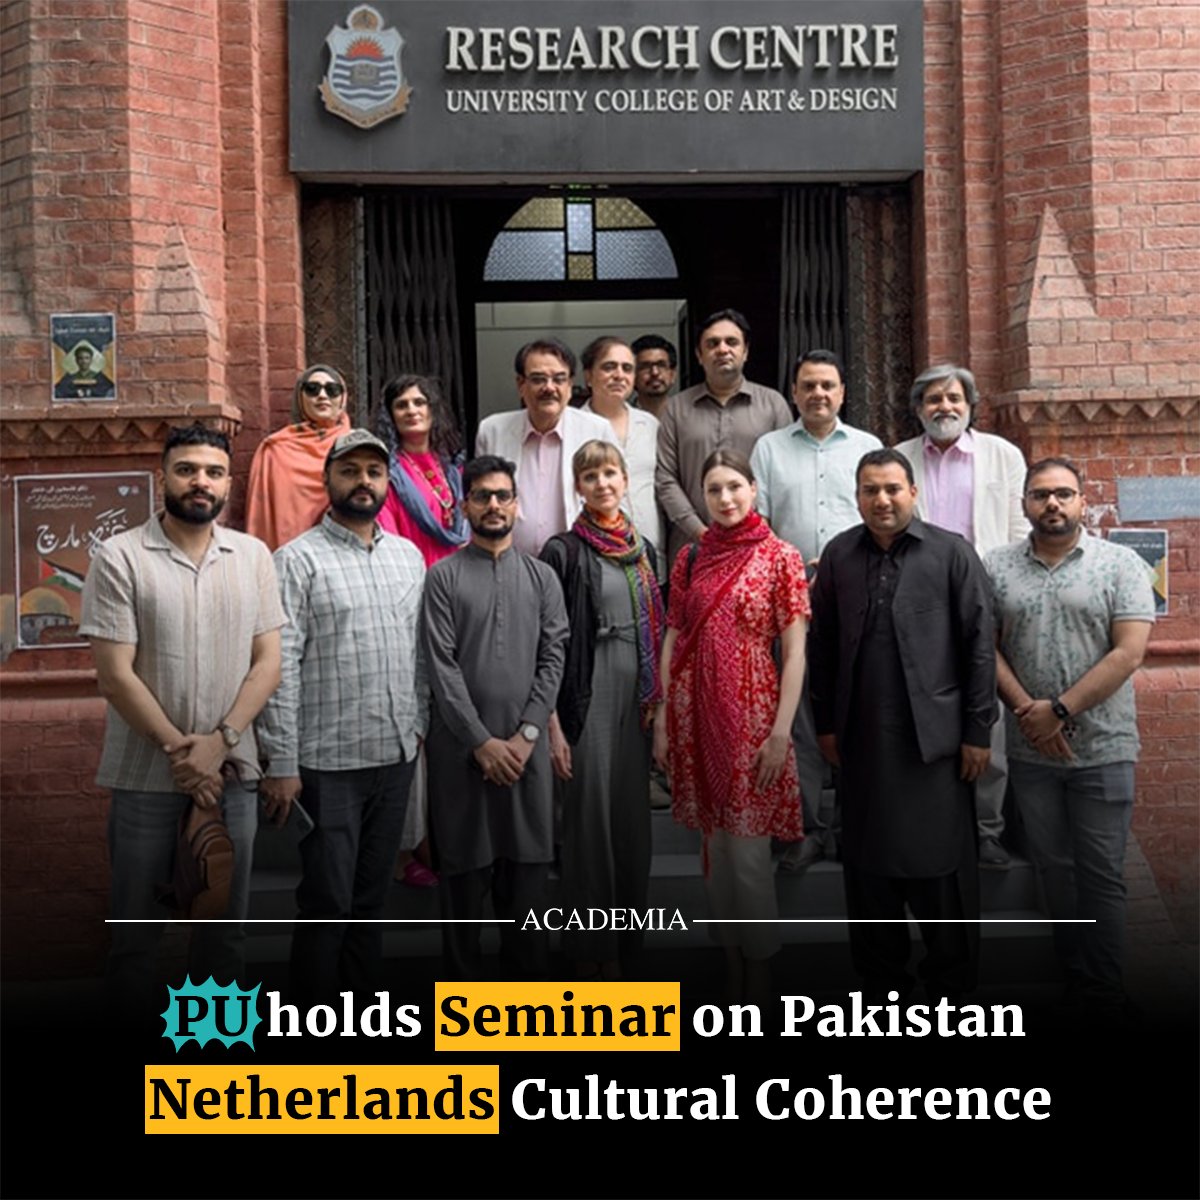 The University of Punjab @PU_OfficialPK Department of Graphic Design recently hosted an enlightening international #seminar focusing on the cultural #coherence between #Pakistan and the #Netherlands. The #event, organized with the collaboration of the Netherlands Embassy…